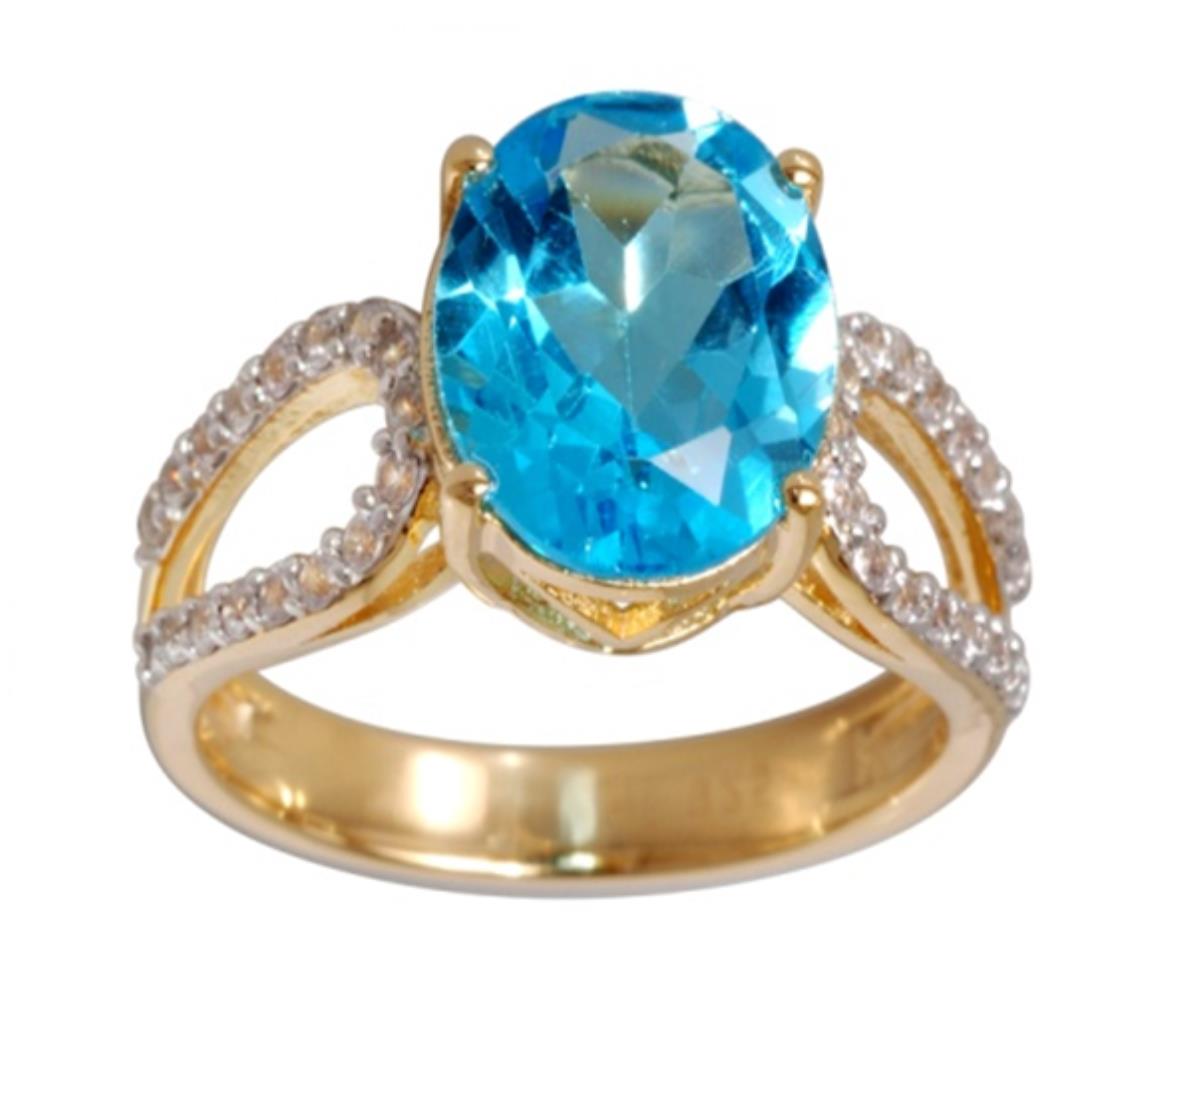 10K Yellow Gold 11x9mm Sky Blue Topaz Oval Cut & White Zircon Open Sides Engagement Ring